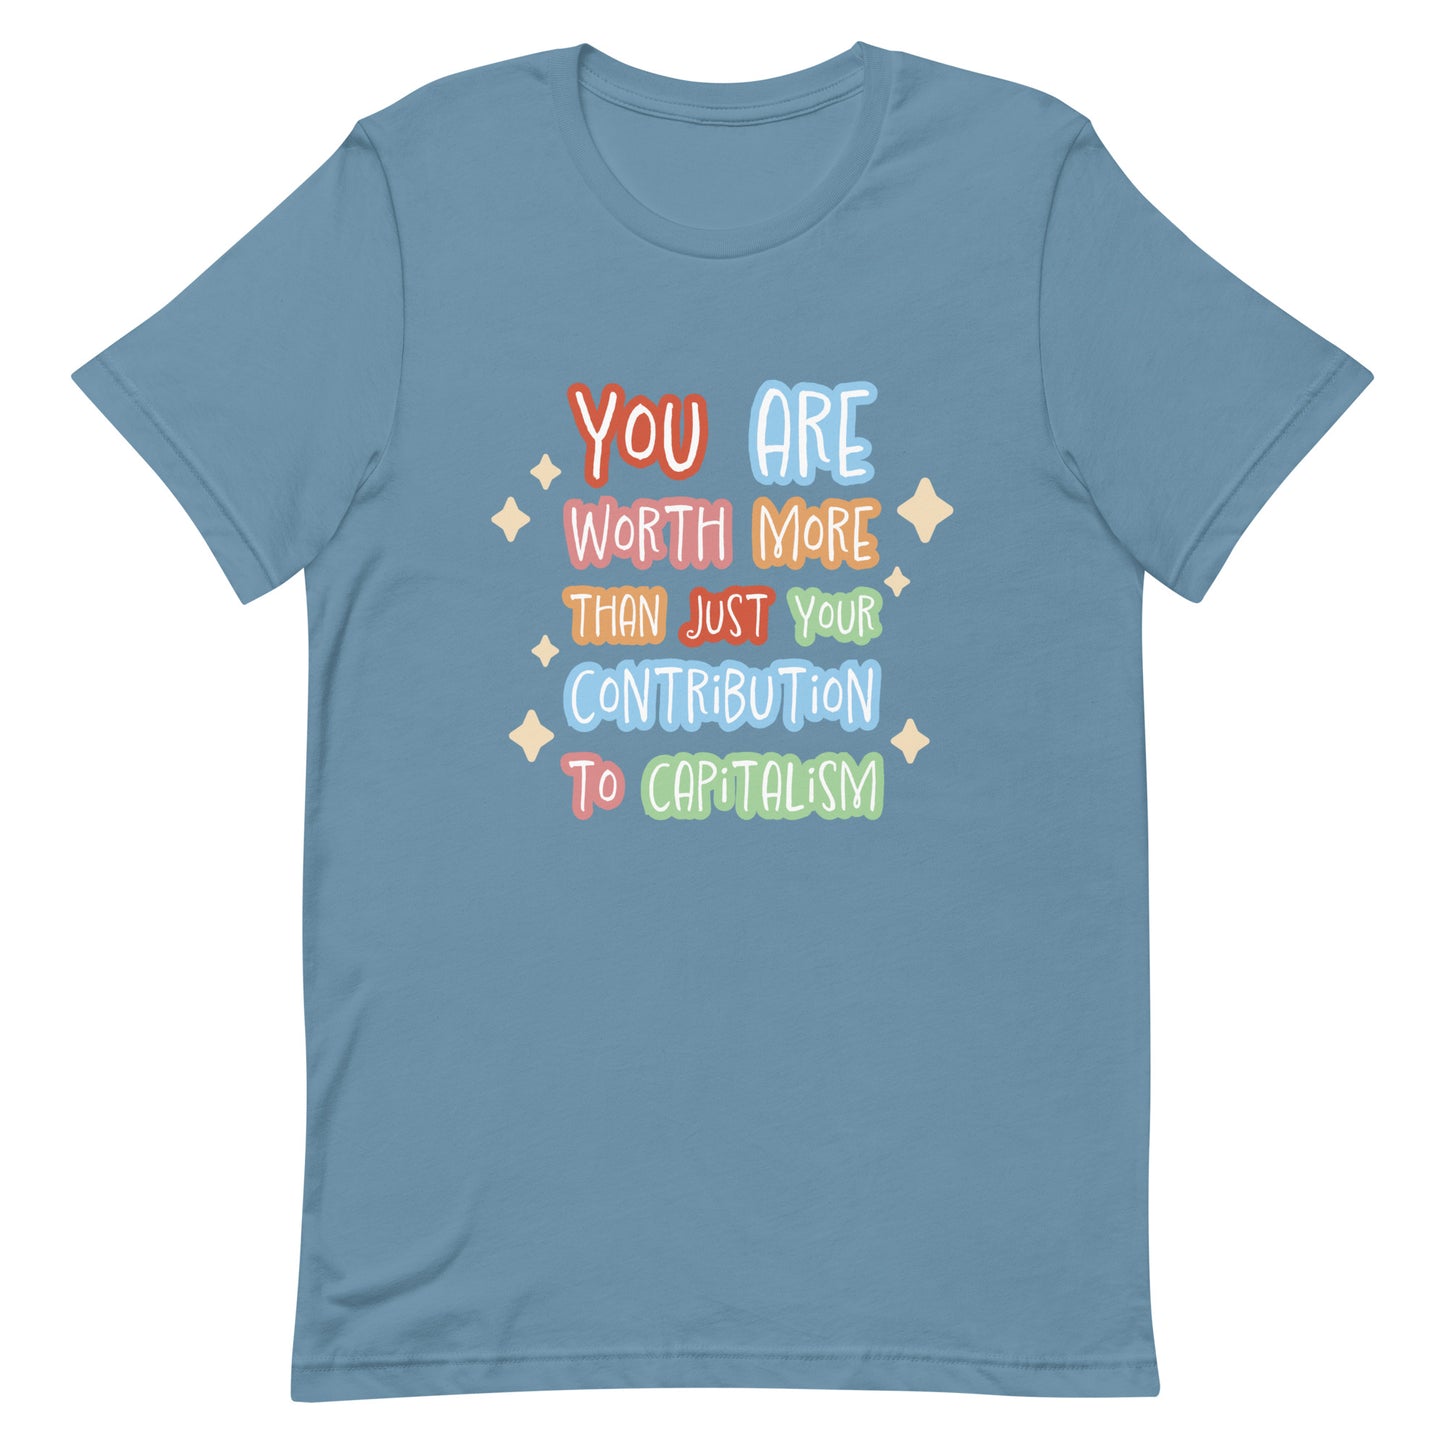 A blue crewneck t-shirt featuring colorful hand-written-style text that reads "You are worth more than just your contribution to capitalism". Sparkles surround the text on each side.